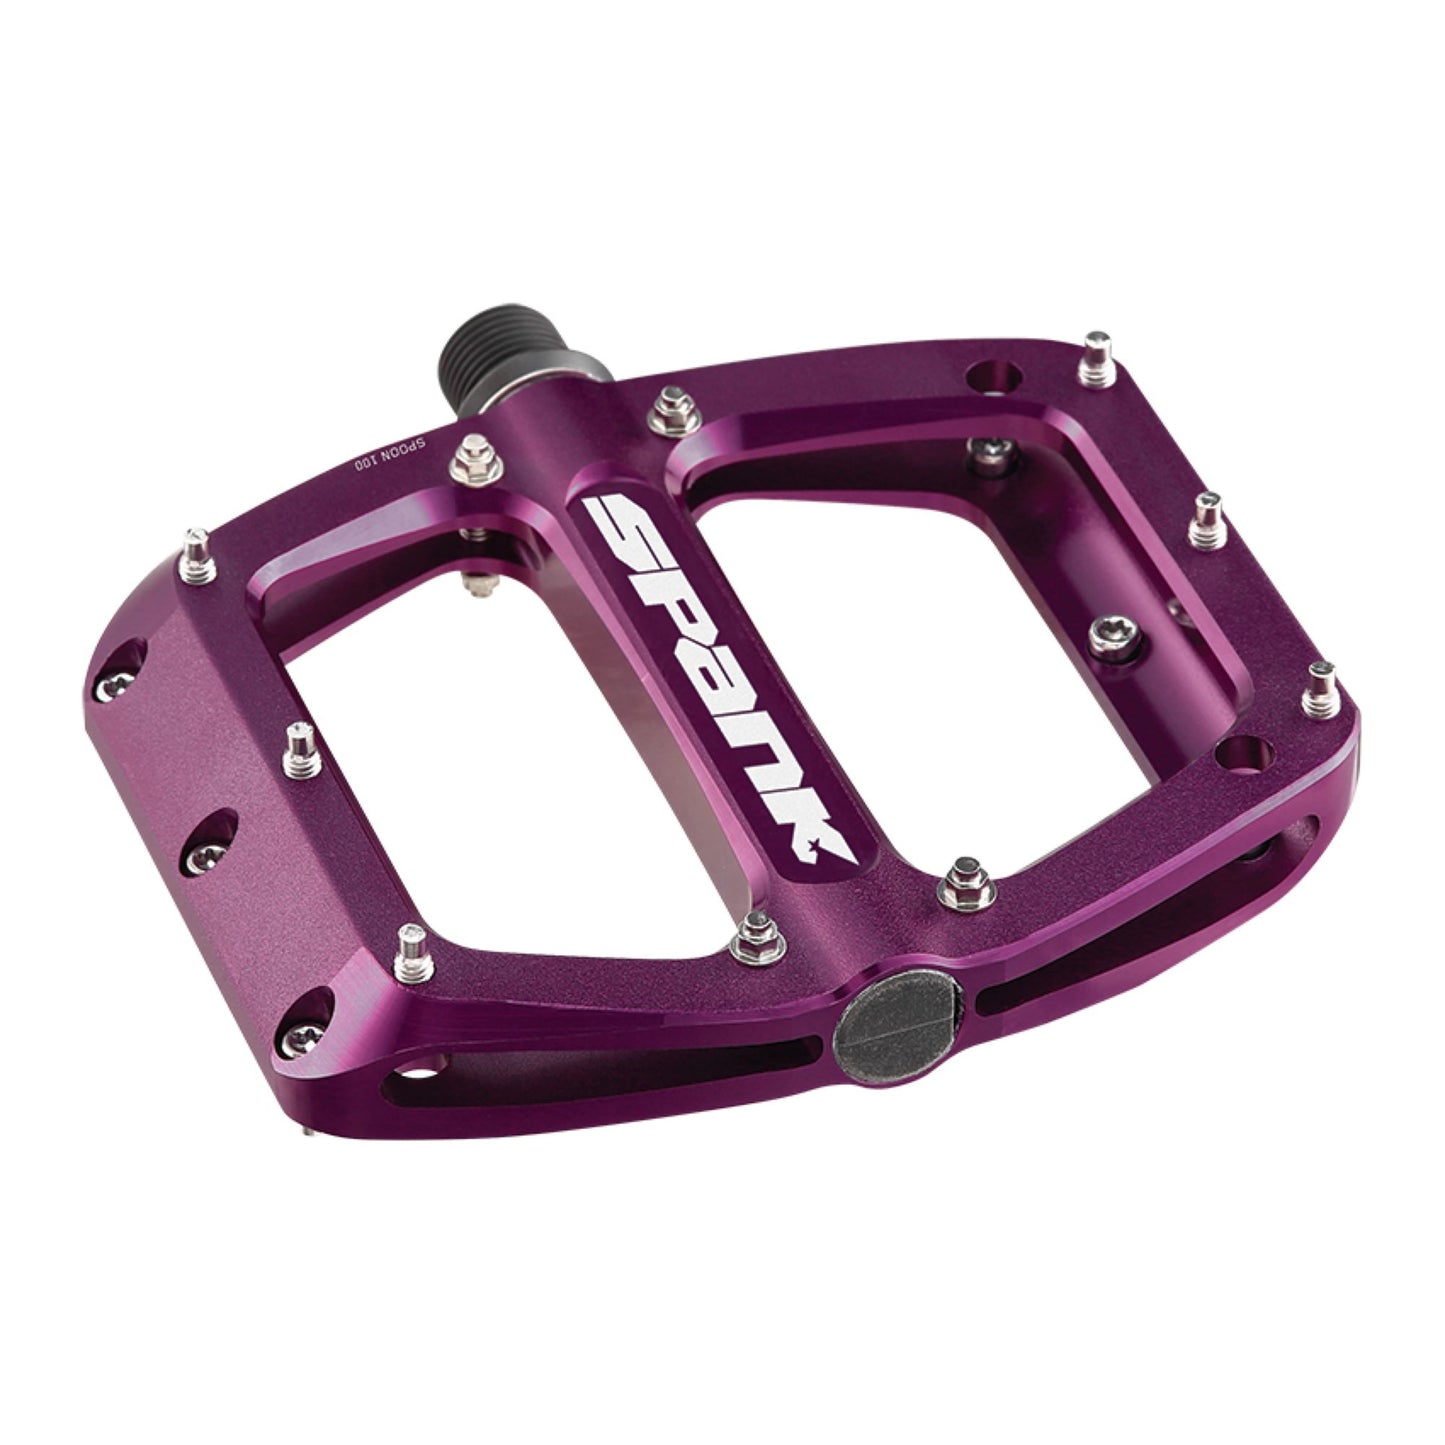 Spank Spoon 100 Pedals Purple 100x105mm Pedals